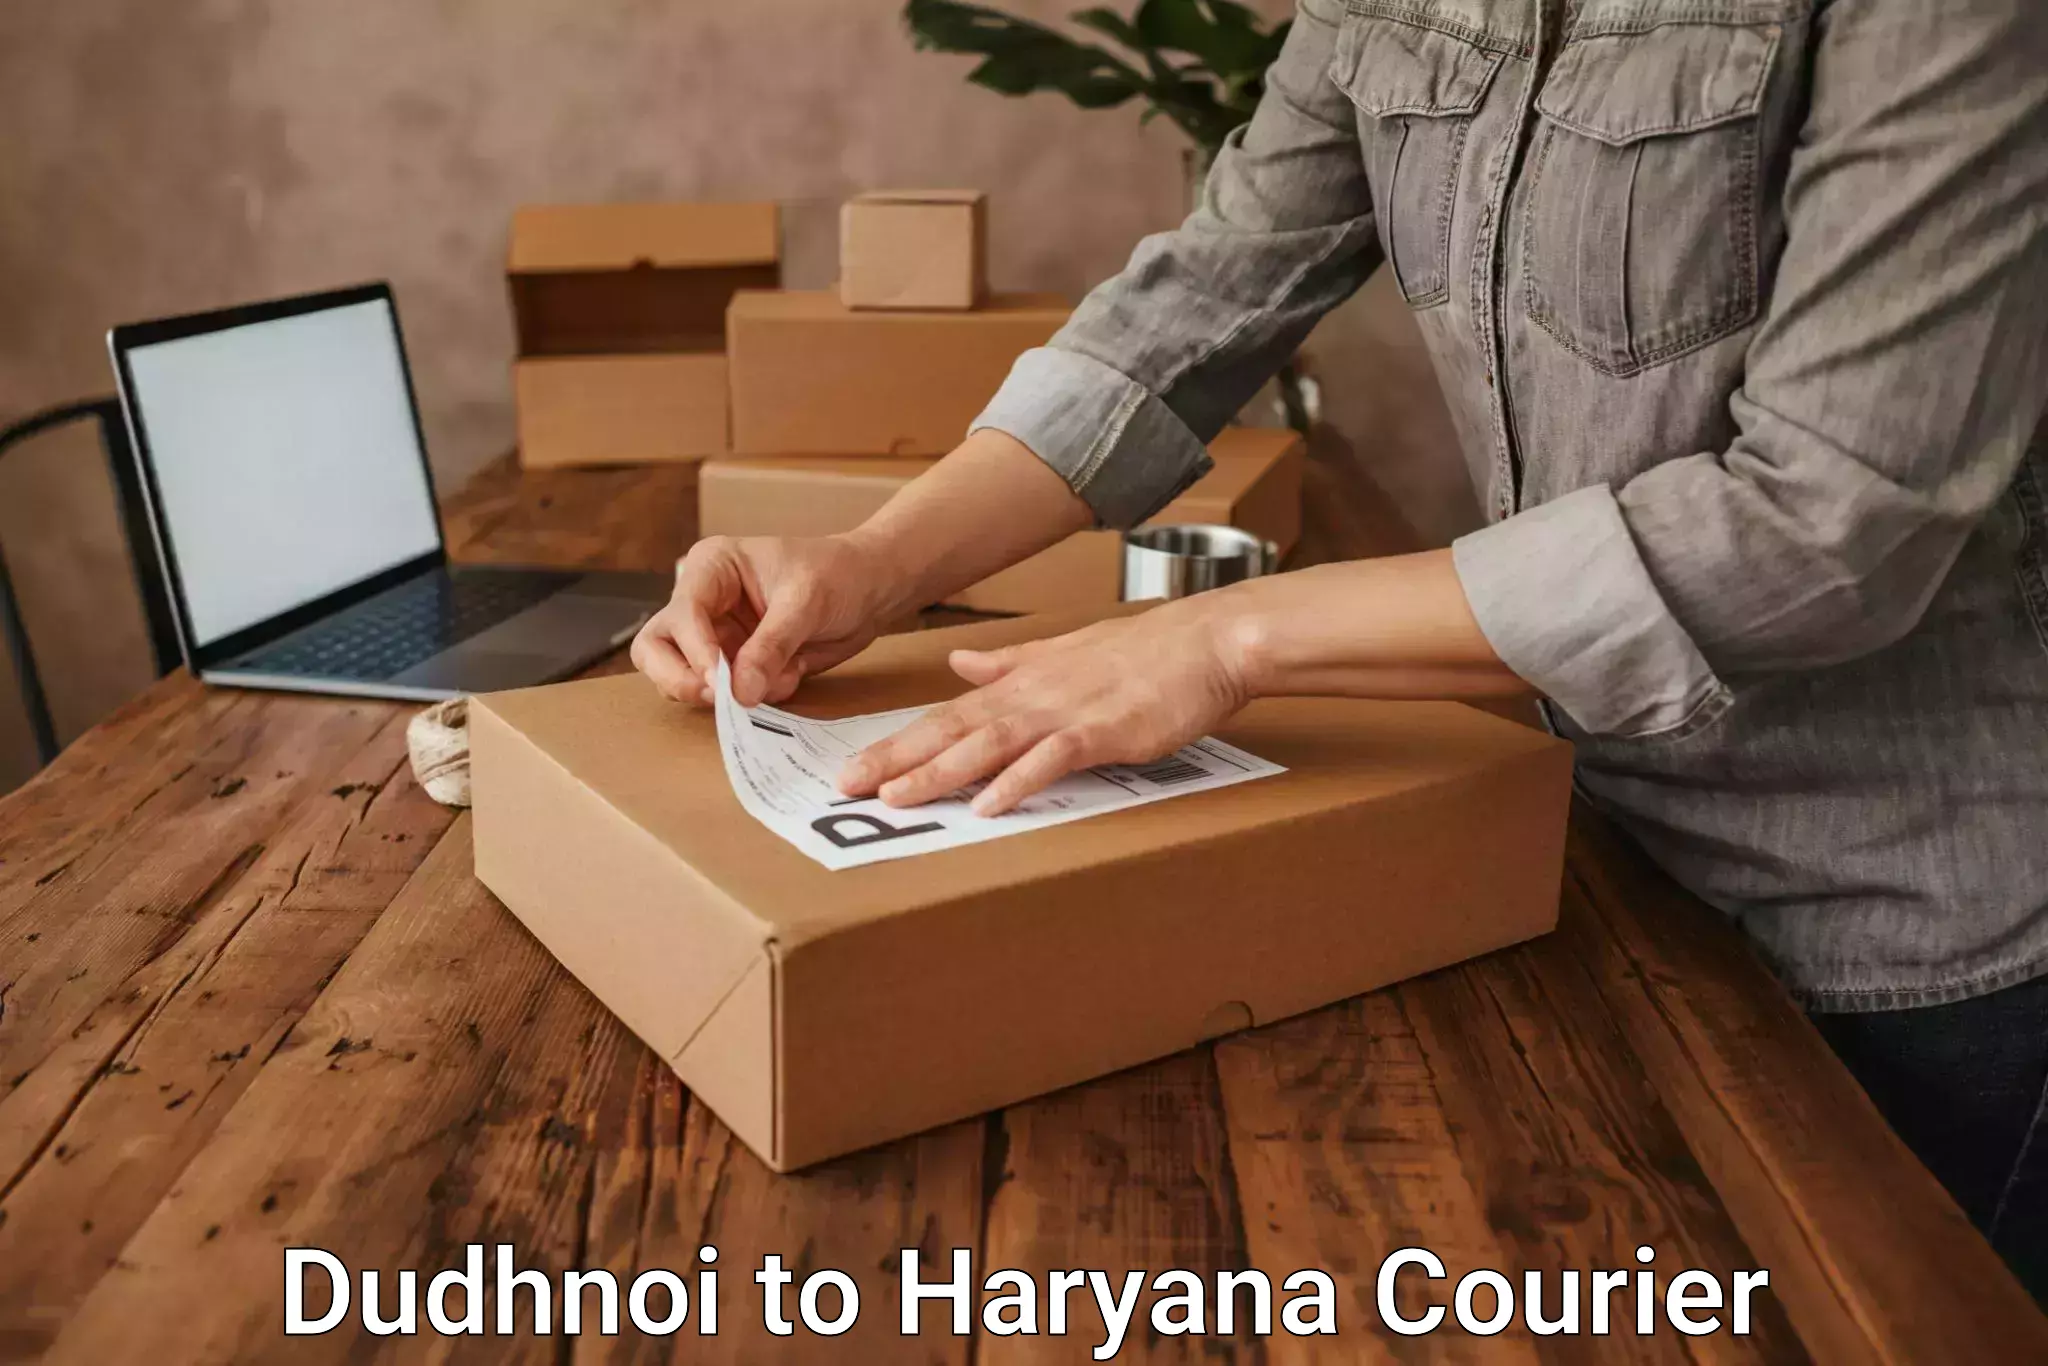 Advanced shipping network in Dudhnoi to Gurgaon